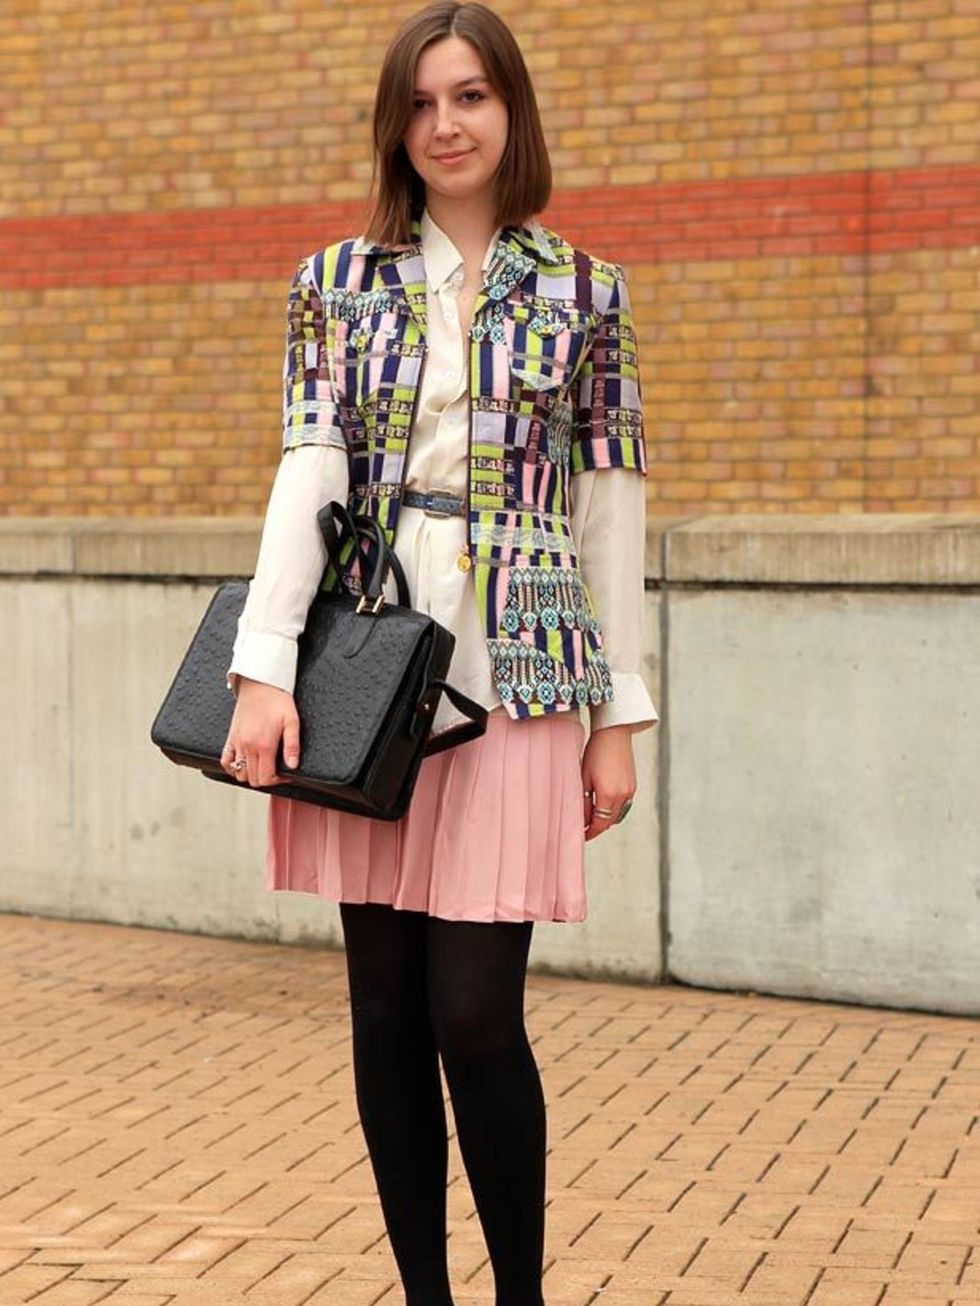 <p>Photo by Anthea Simms.Helena Raywood, 19, Student. Vintage jacket by Christian Lacroix, shirt from Grandmother, vintage belt by Christian Dior, vintage skirt, Etro shoes, vintage bag by Pierre Cardin.</p>